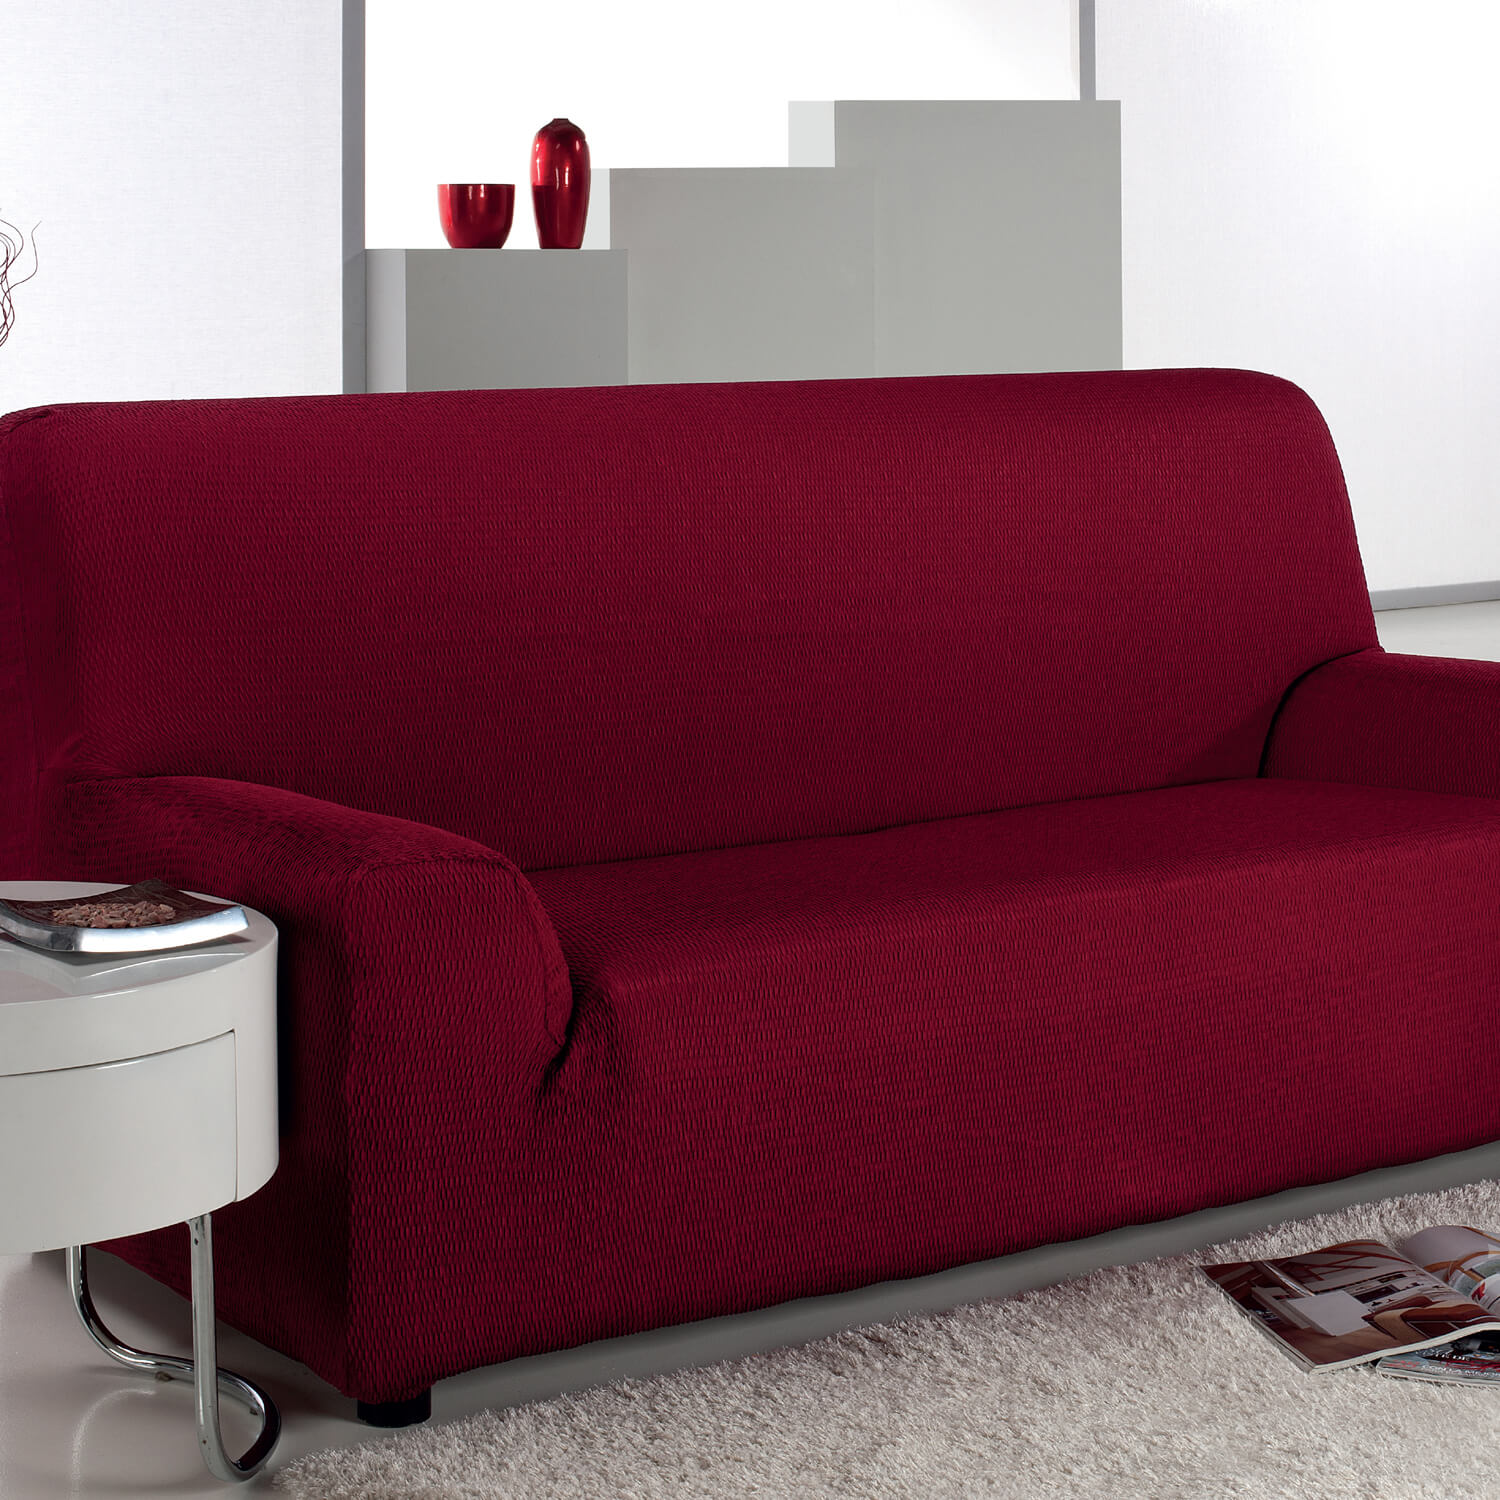 3 Seat Sofa Covers Velcromag